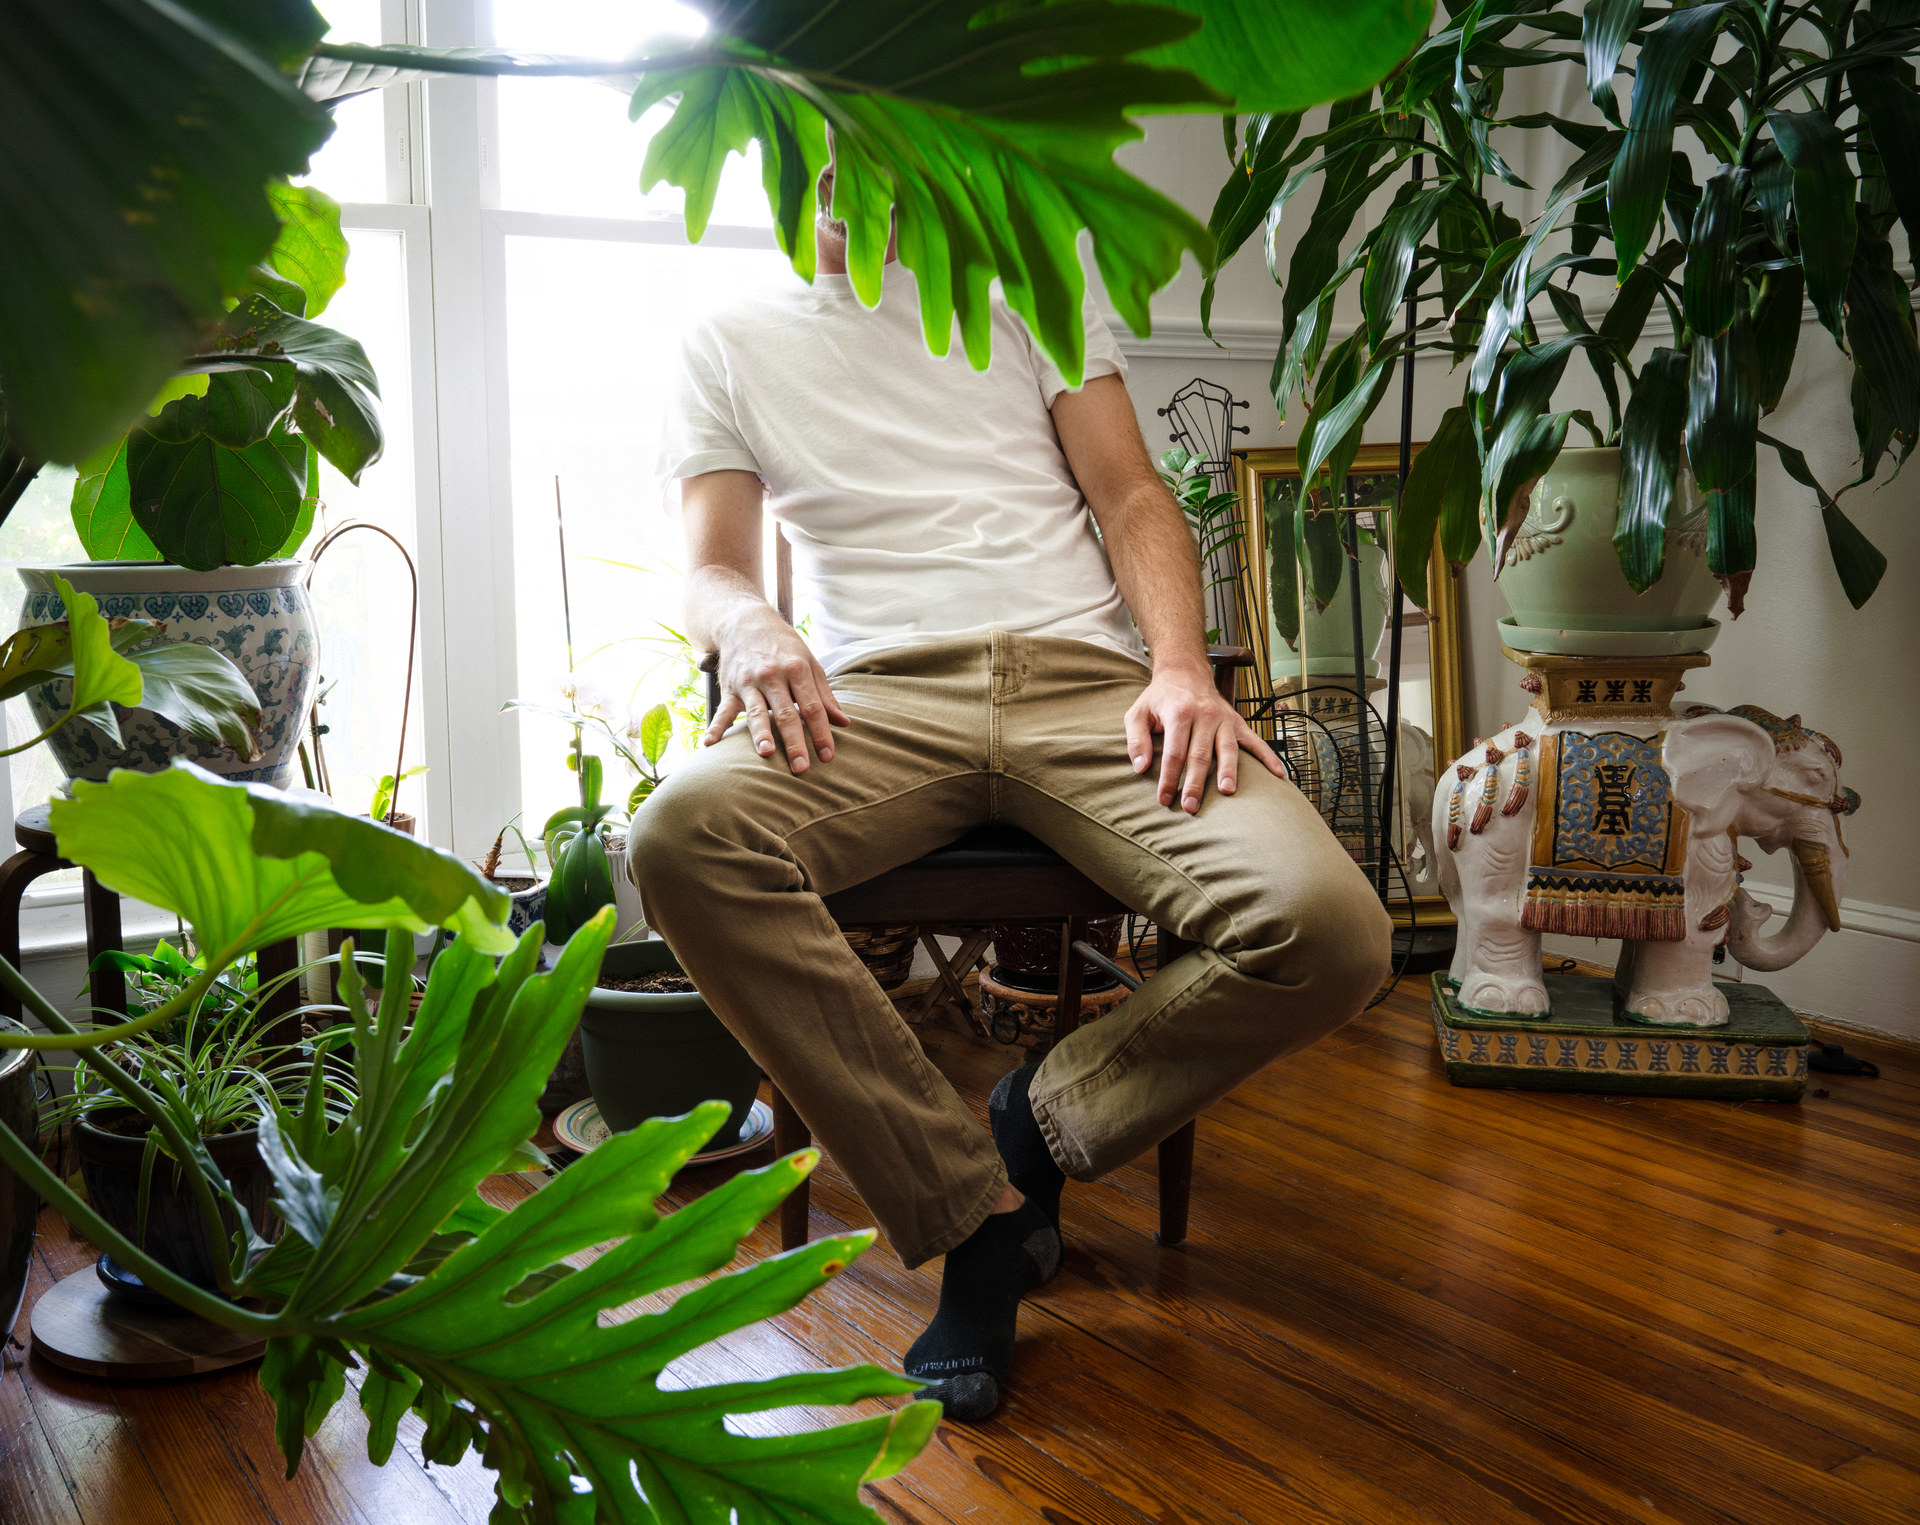 Picture of a man whose face is obscured by a house plant.